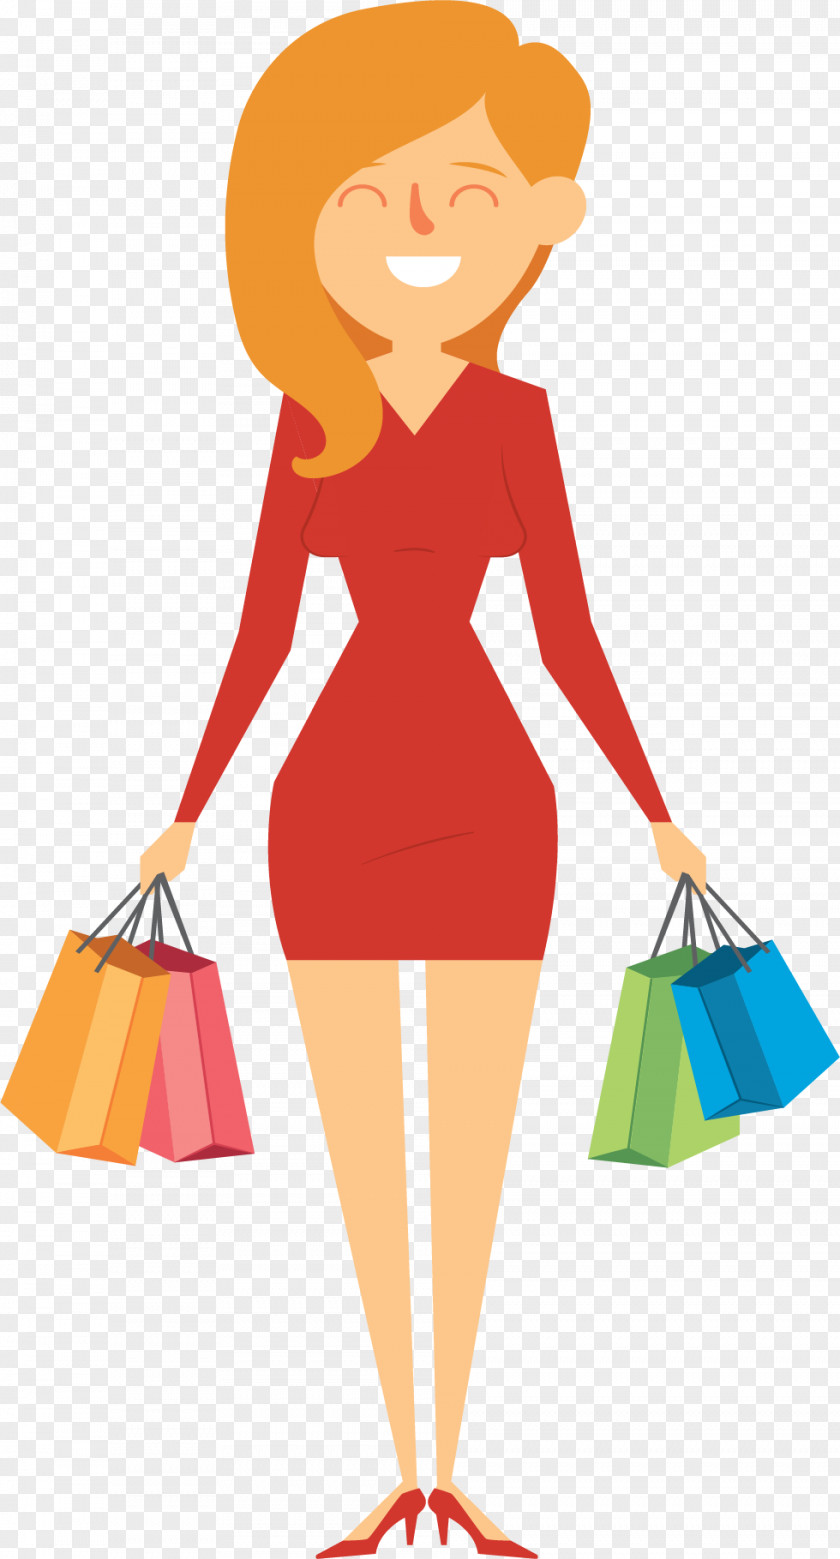 Happy To Go Shopping For Women Illustration PNG